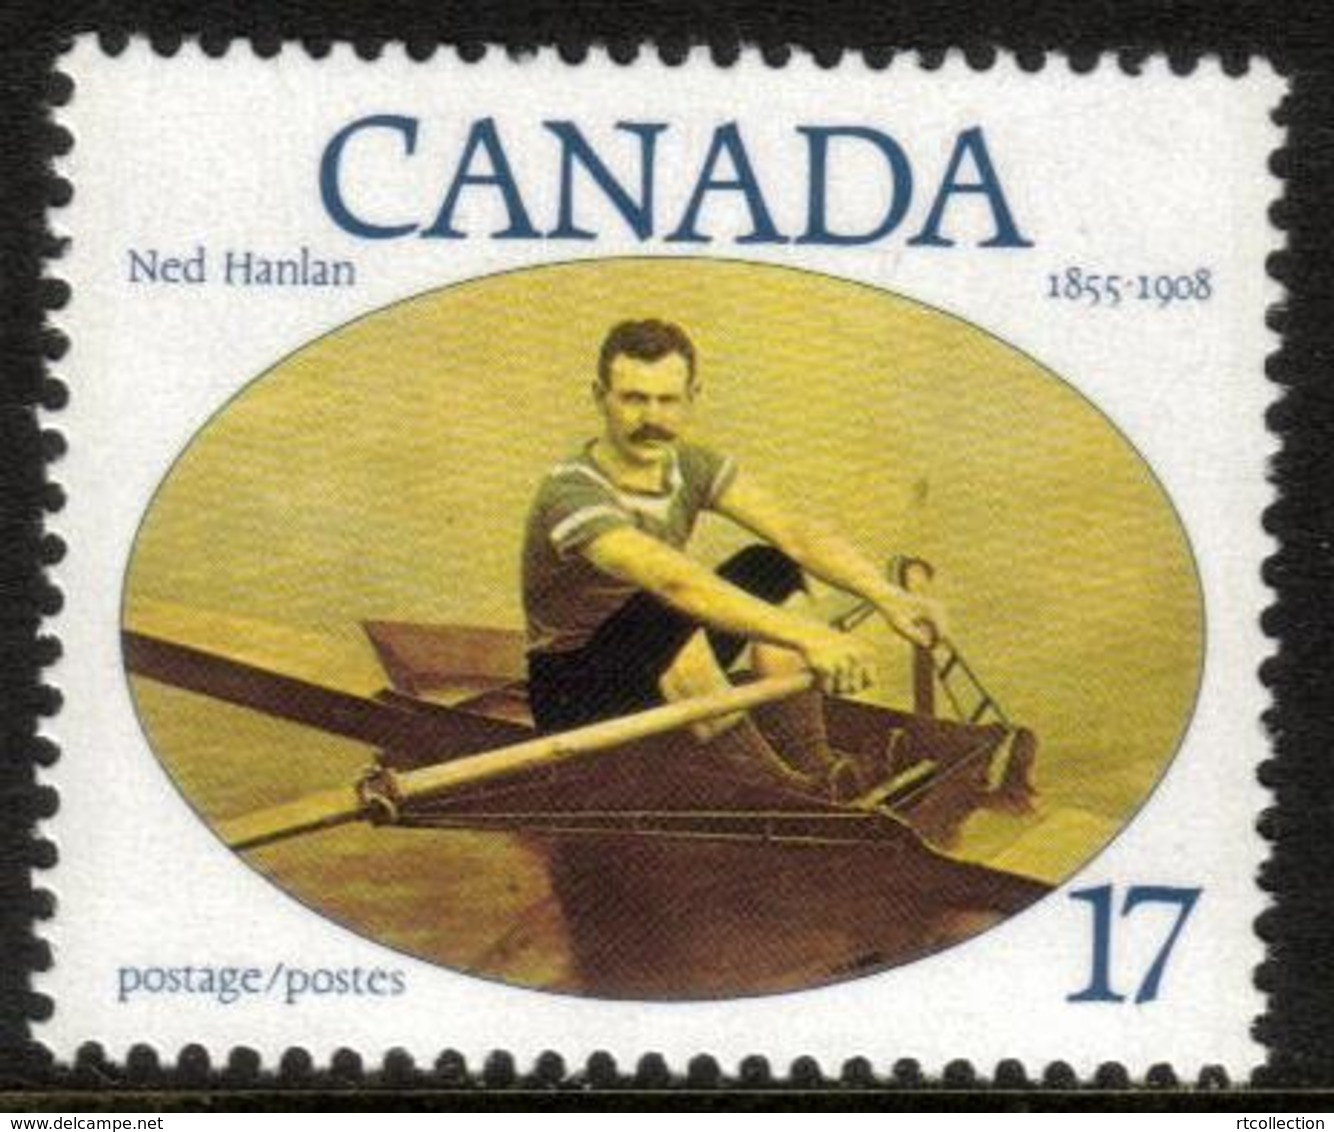 Canada 1980 - One Famous Canadians Ned Hanlan Oarsman Sports Rowing People Stamp MNH Yvert 741 SC#802 - Unused Stamps